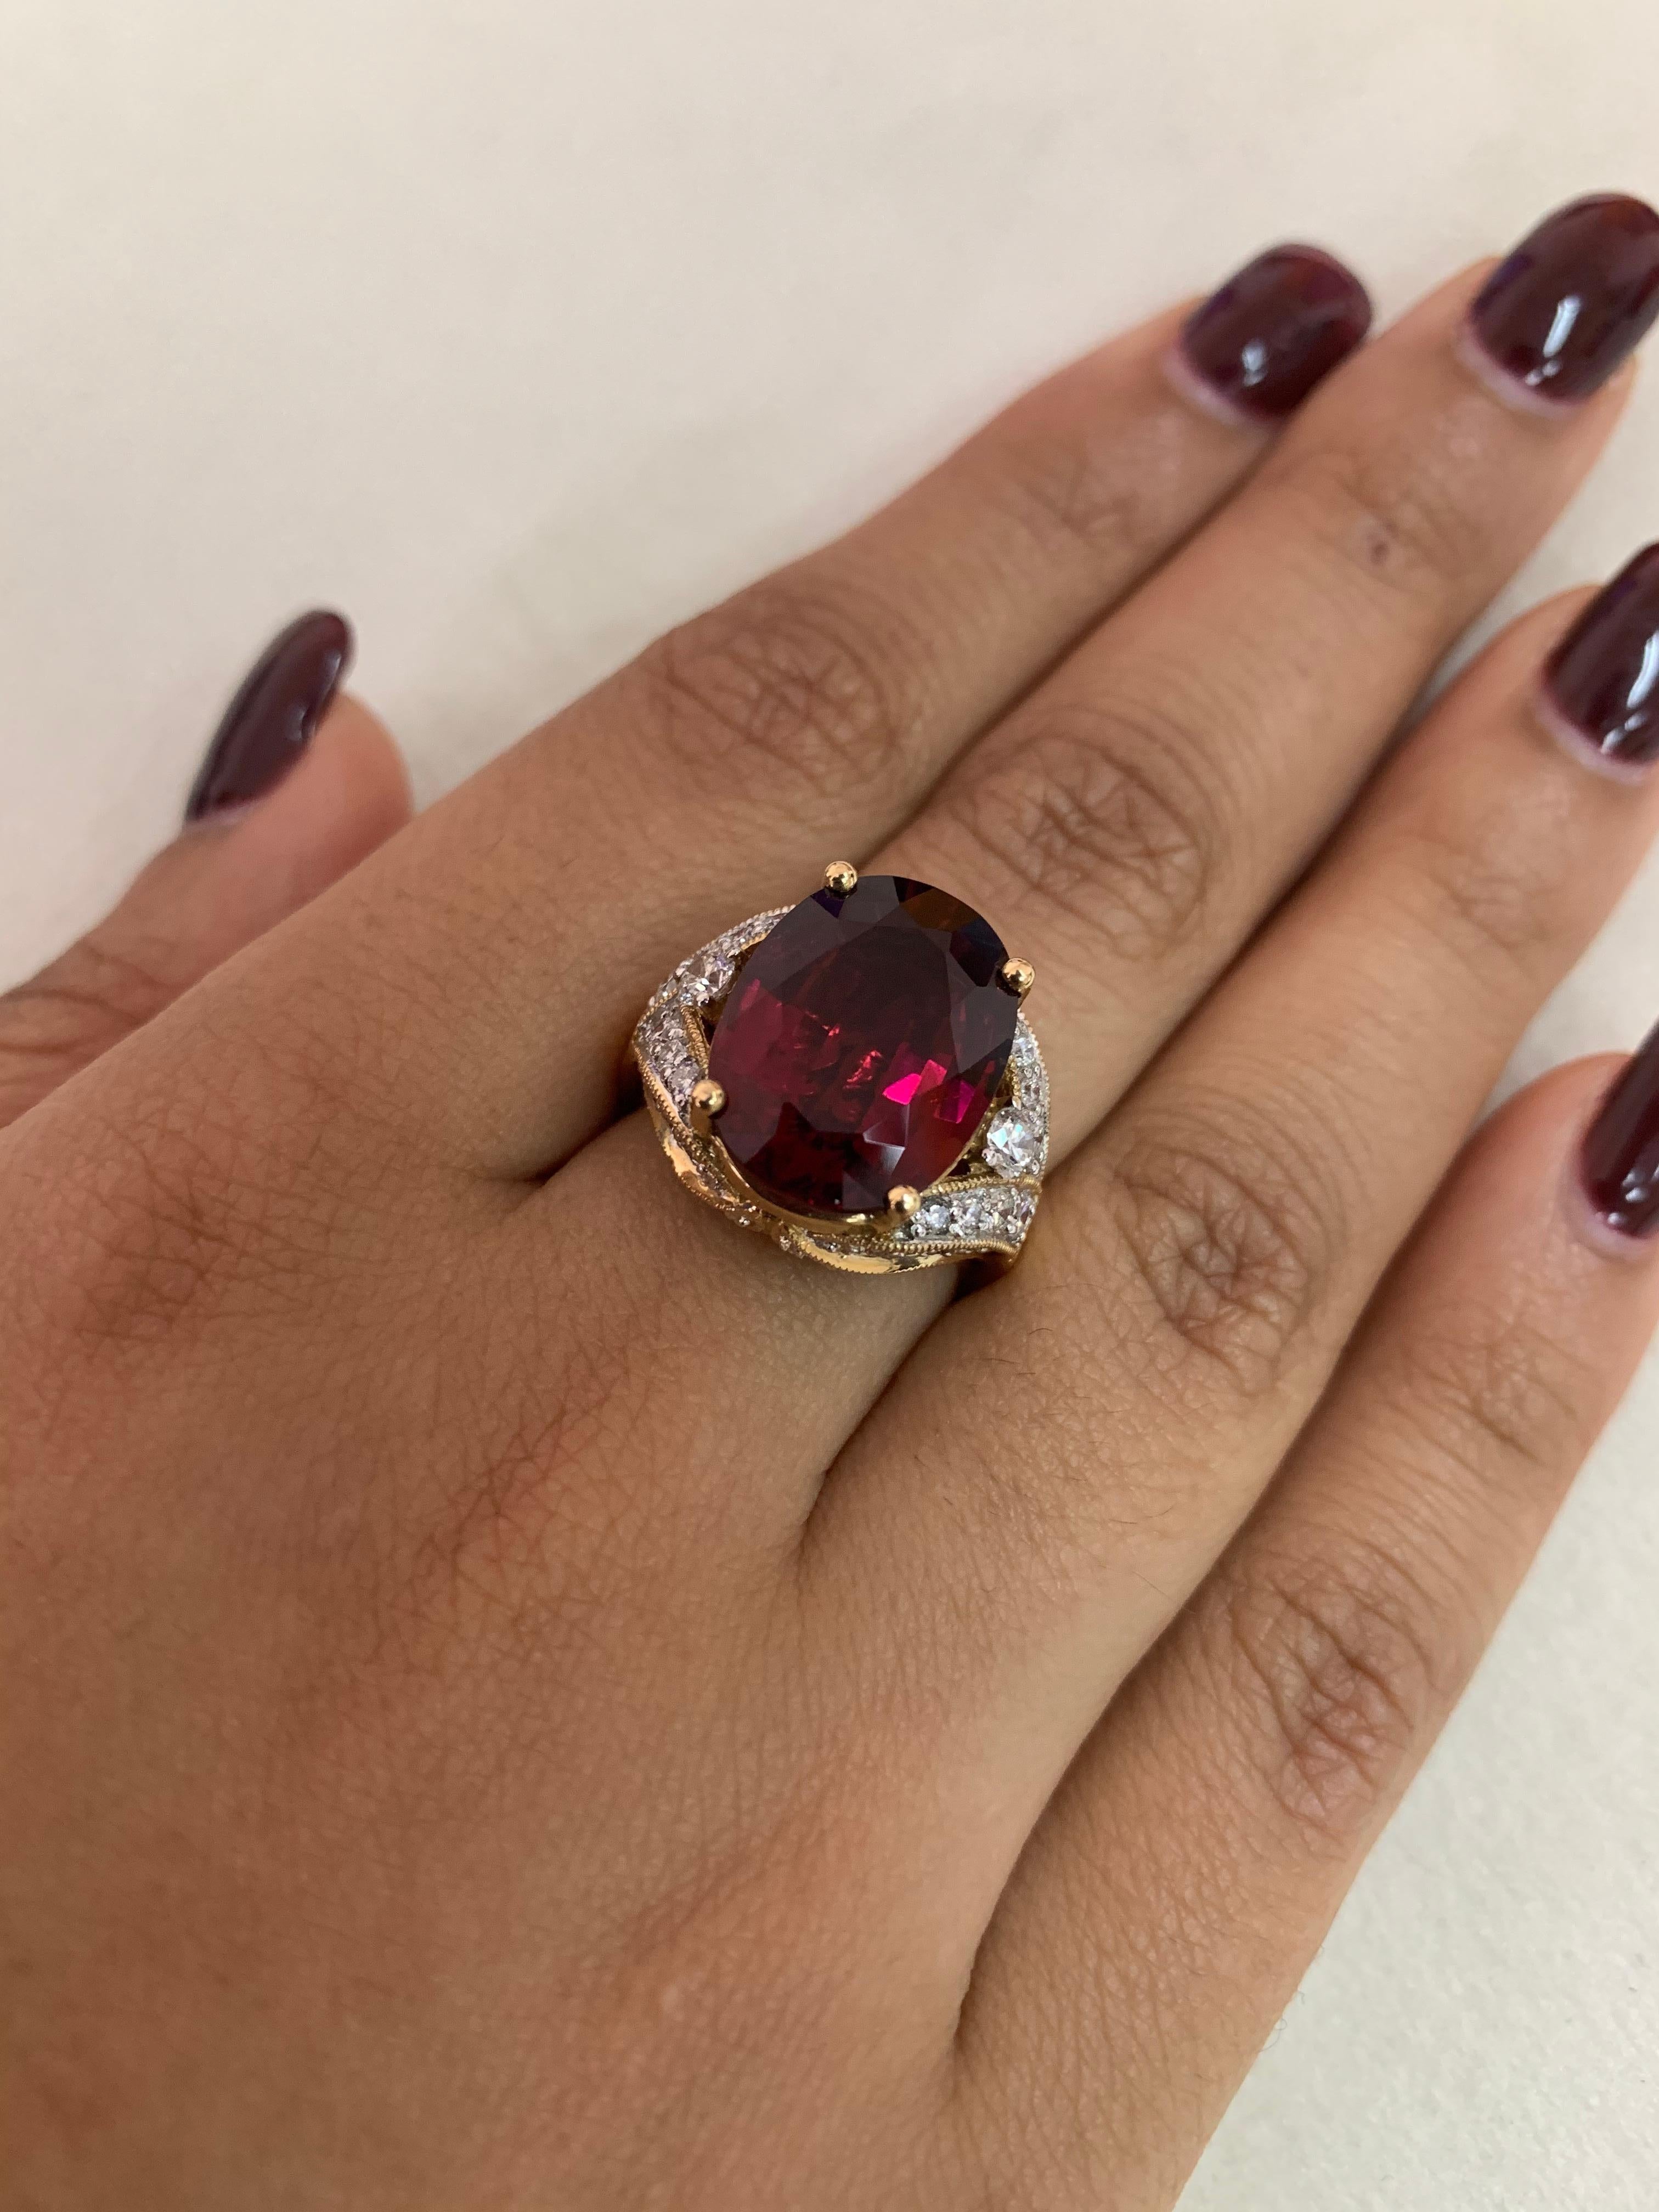 7.6 Carat Rubelite Tourmaline Ring with Diamond in 18 Karat Yellow Gold In New Condition For Sale In Hong Kong, HK